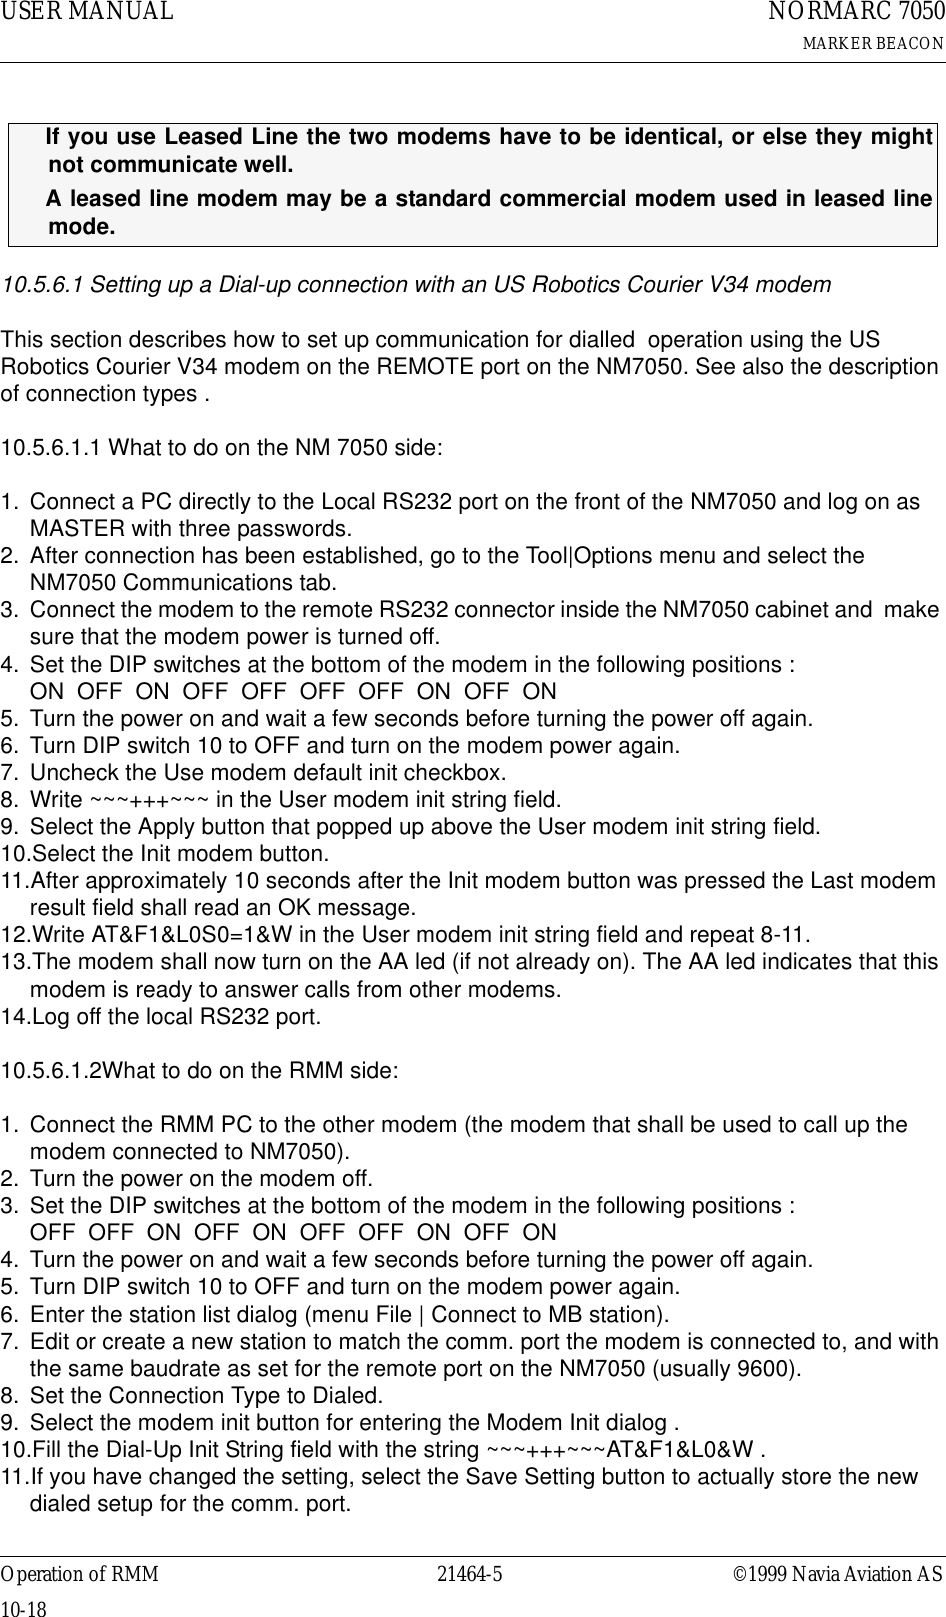 USER MANUAL10-1821464-5NORMARC 7050MARKER BEACONOperation of RMM ©1999 Navia Aviation AS10.5.6.1 Setting up a Dial-up connection with an US Robotics Courier V34 modemThis section describes how to set up communication for dialled  operation using the US Robotics Courier V34 modem on the REMOTE port on the NM7050. See also the description of connection types .10.5.6.1.1 What to do on the NM 7050 side:1. Connect a PC directly to the Local RS232 port on the front of the NM7050 and log on as MASTER with three passwords.2. After connection has been established, go to the Tool|Options menu and select the NM7050 Communications tab.3. Connect the modem to the remote RS232 connector inside the NM7050 cabinet and  make sure that the modem power is turned off.4. Set the DIP switches at the bottom of the modem in the following positions :                      ON  OFF  ON  OFF  OFF  OFF  OFF  ON  OFF  ON5. Turn the power on and wait a few seconds before turning the power off again.6. Turn DIP switch 10 to OFF and turn on the modem power again.7. Uncheck the Use modem default init checkbox.8. Write ~~~+++~~~ in the User modem init string field.9. Select the Apply button that popped up above the User modem init string field.10.Select the Init modem button.11.After approximately 10 seconds after the Init modem button was pressed the Last modem result field shall read an OK message.12.Write AT&amp;F1&amp;L0S0=1&amp;W in the User modem init string field and repeat 8-11.13.The modem shall now turn on the AA led (if not already on). The AA led indicates that this modem is ready to answer calls from other modems.14.Log off the local RS232 port.10.5.6.1.2What to do on the RMM side:1. Connect the RMM PC to the other modem (the modem that shall be used to call up the modem connected to NM7050).2. Turn the power on the modem off.3. Set the DIP switches at the bottom of the modem in the following positions :                    OFF  OFF  ON  OFF  ON  OFF  OFF  ON  OFF  ON4. Turn the power on and wait a few seconds before turning the power off again.5. Turn DIP switch 10 to OFF and turn on the modem power again.6. Enter the station list dialog (menu File | Connect to MB station).7. Edit or create a new station to match the comm. port the modem is connected to, and with the same baudrate as set for the remote port on the NM7050 (usually 9600).8. Set the Connection Type to Dialed.9. Select the modem init button for entering the Modem Init dialog .10.Fill the Dial-Up Init String field with the string ~~~+++~~~AT&amp;F1&amp;L0&amp;W .11.If you have changed the setting, select the Save Setting button to actually store the new dialed setup for the comm. port.ΤIf you use Leased Line the two modems have to be identical, or else they mightnot communicate well.ΤA leased line modem may be a standard commercial modem used in leased linemode.